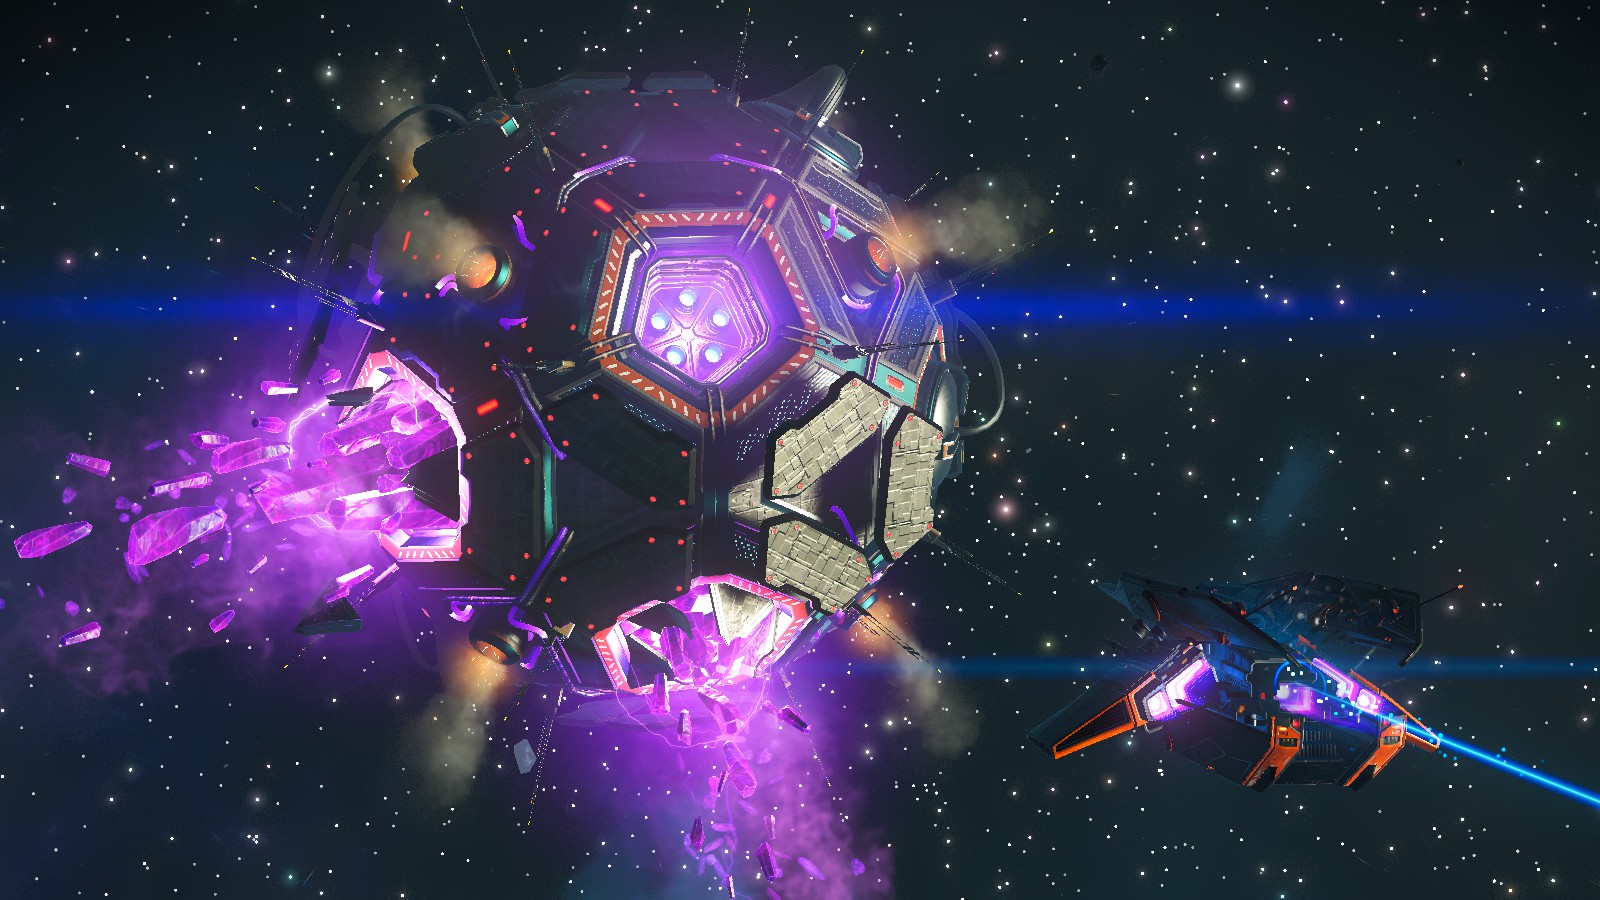 No Man's Sky, Expedition 10: Singularity. A multi-winged orange Sentinel ship approaches a space anomaly with giant sharp purple crystal shards exploding outward from its hull as it gives off a disturbing purple glow.   